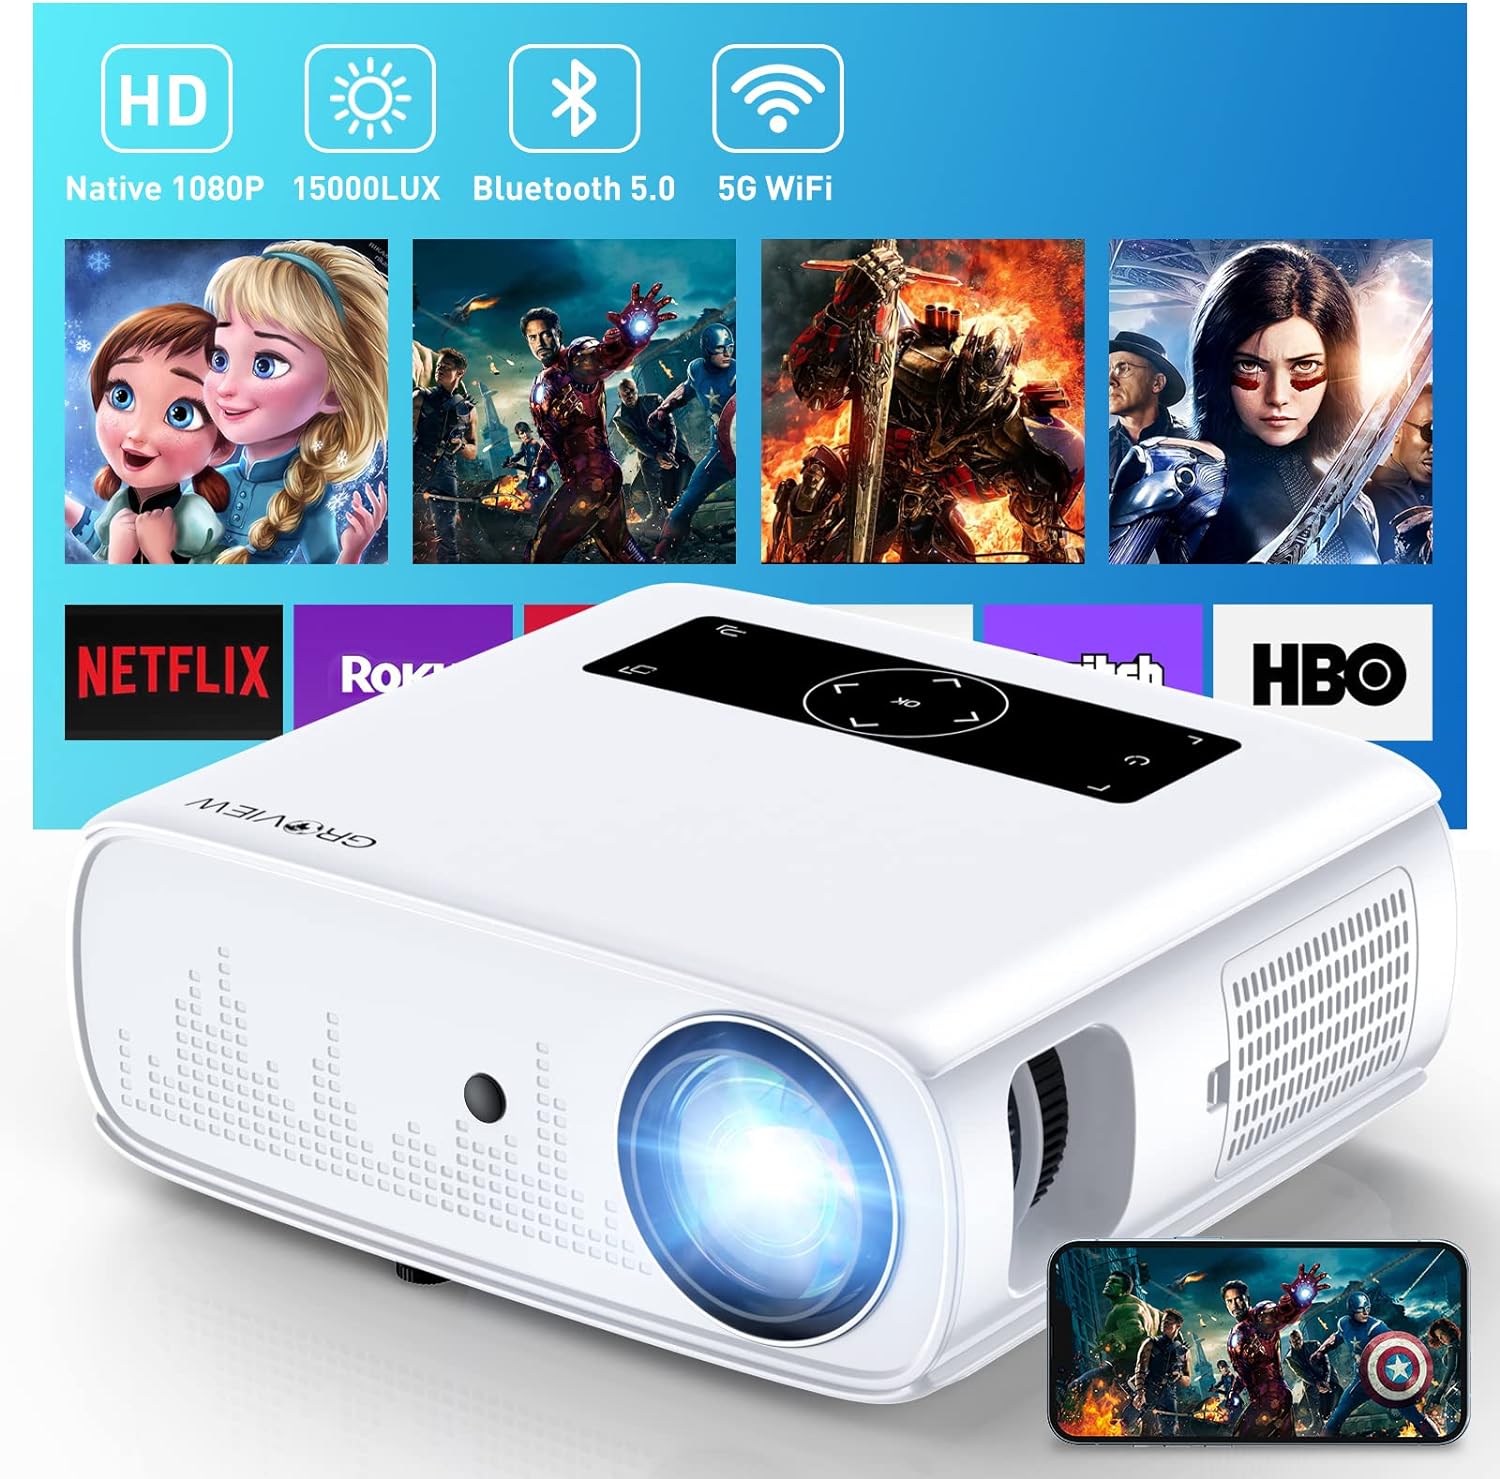 GROVIEW Projector, 15000lux 490ANSI Native 1080P WiFi Bluetooth Projector - $150